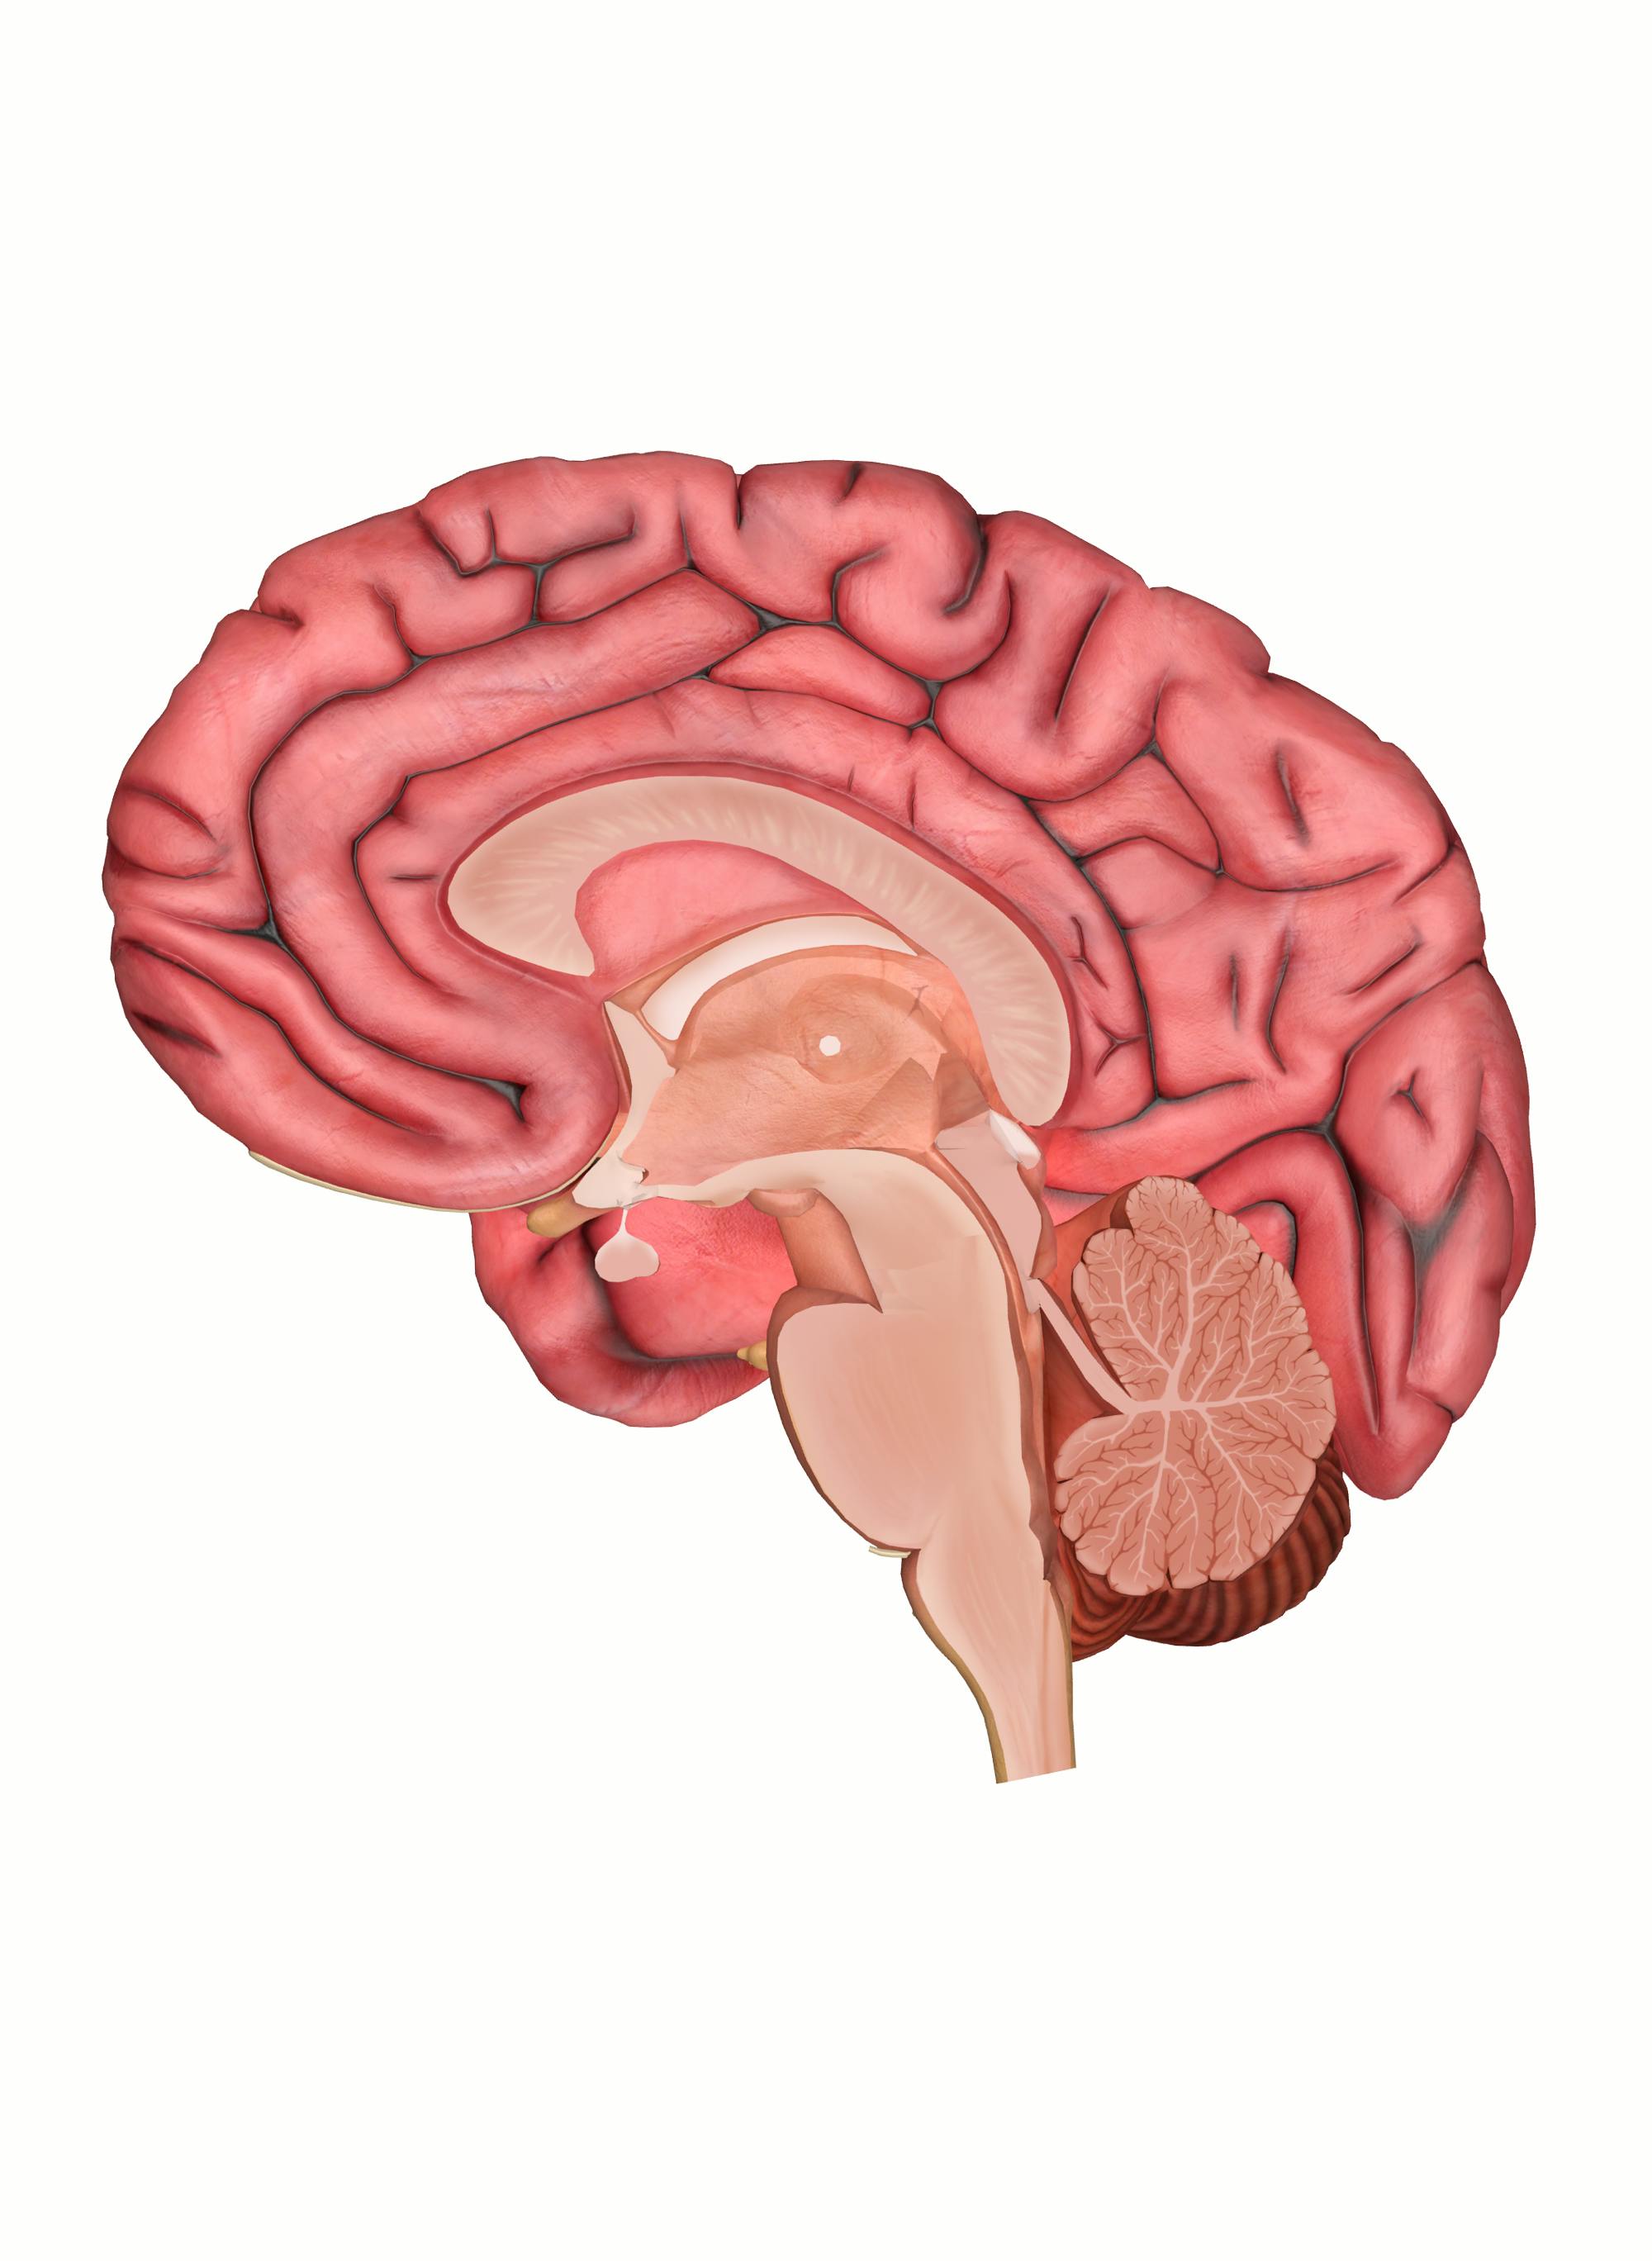 left side of the brain labeled